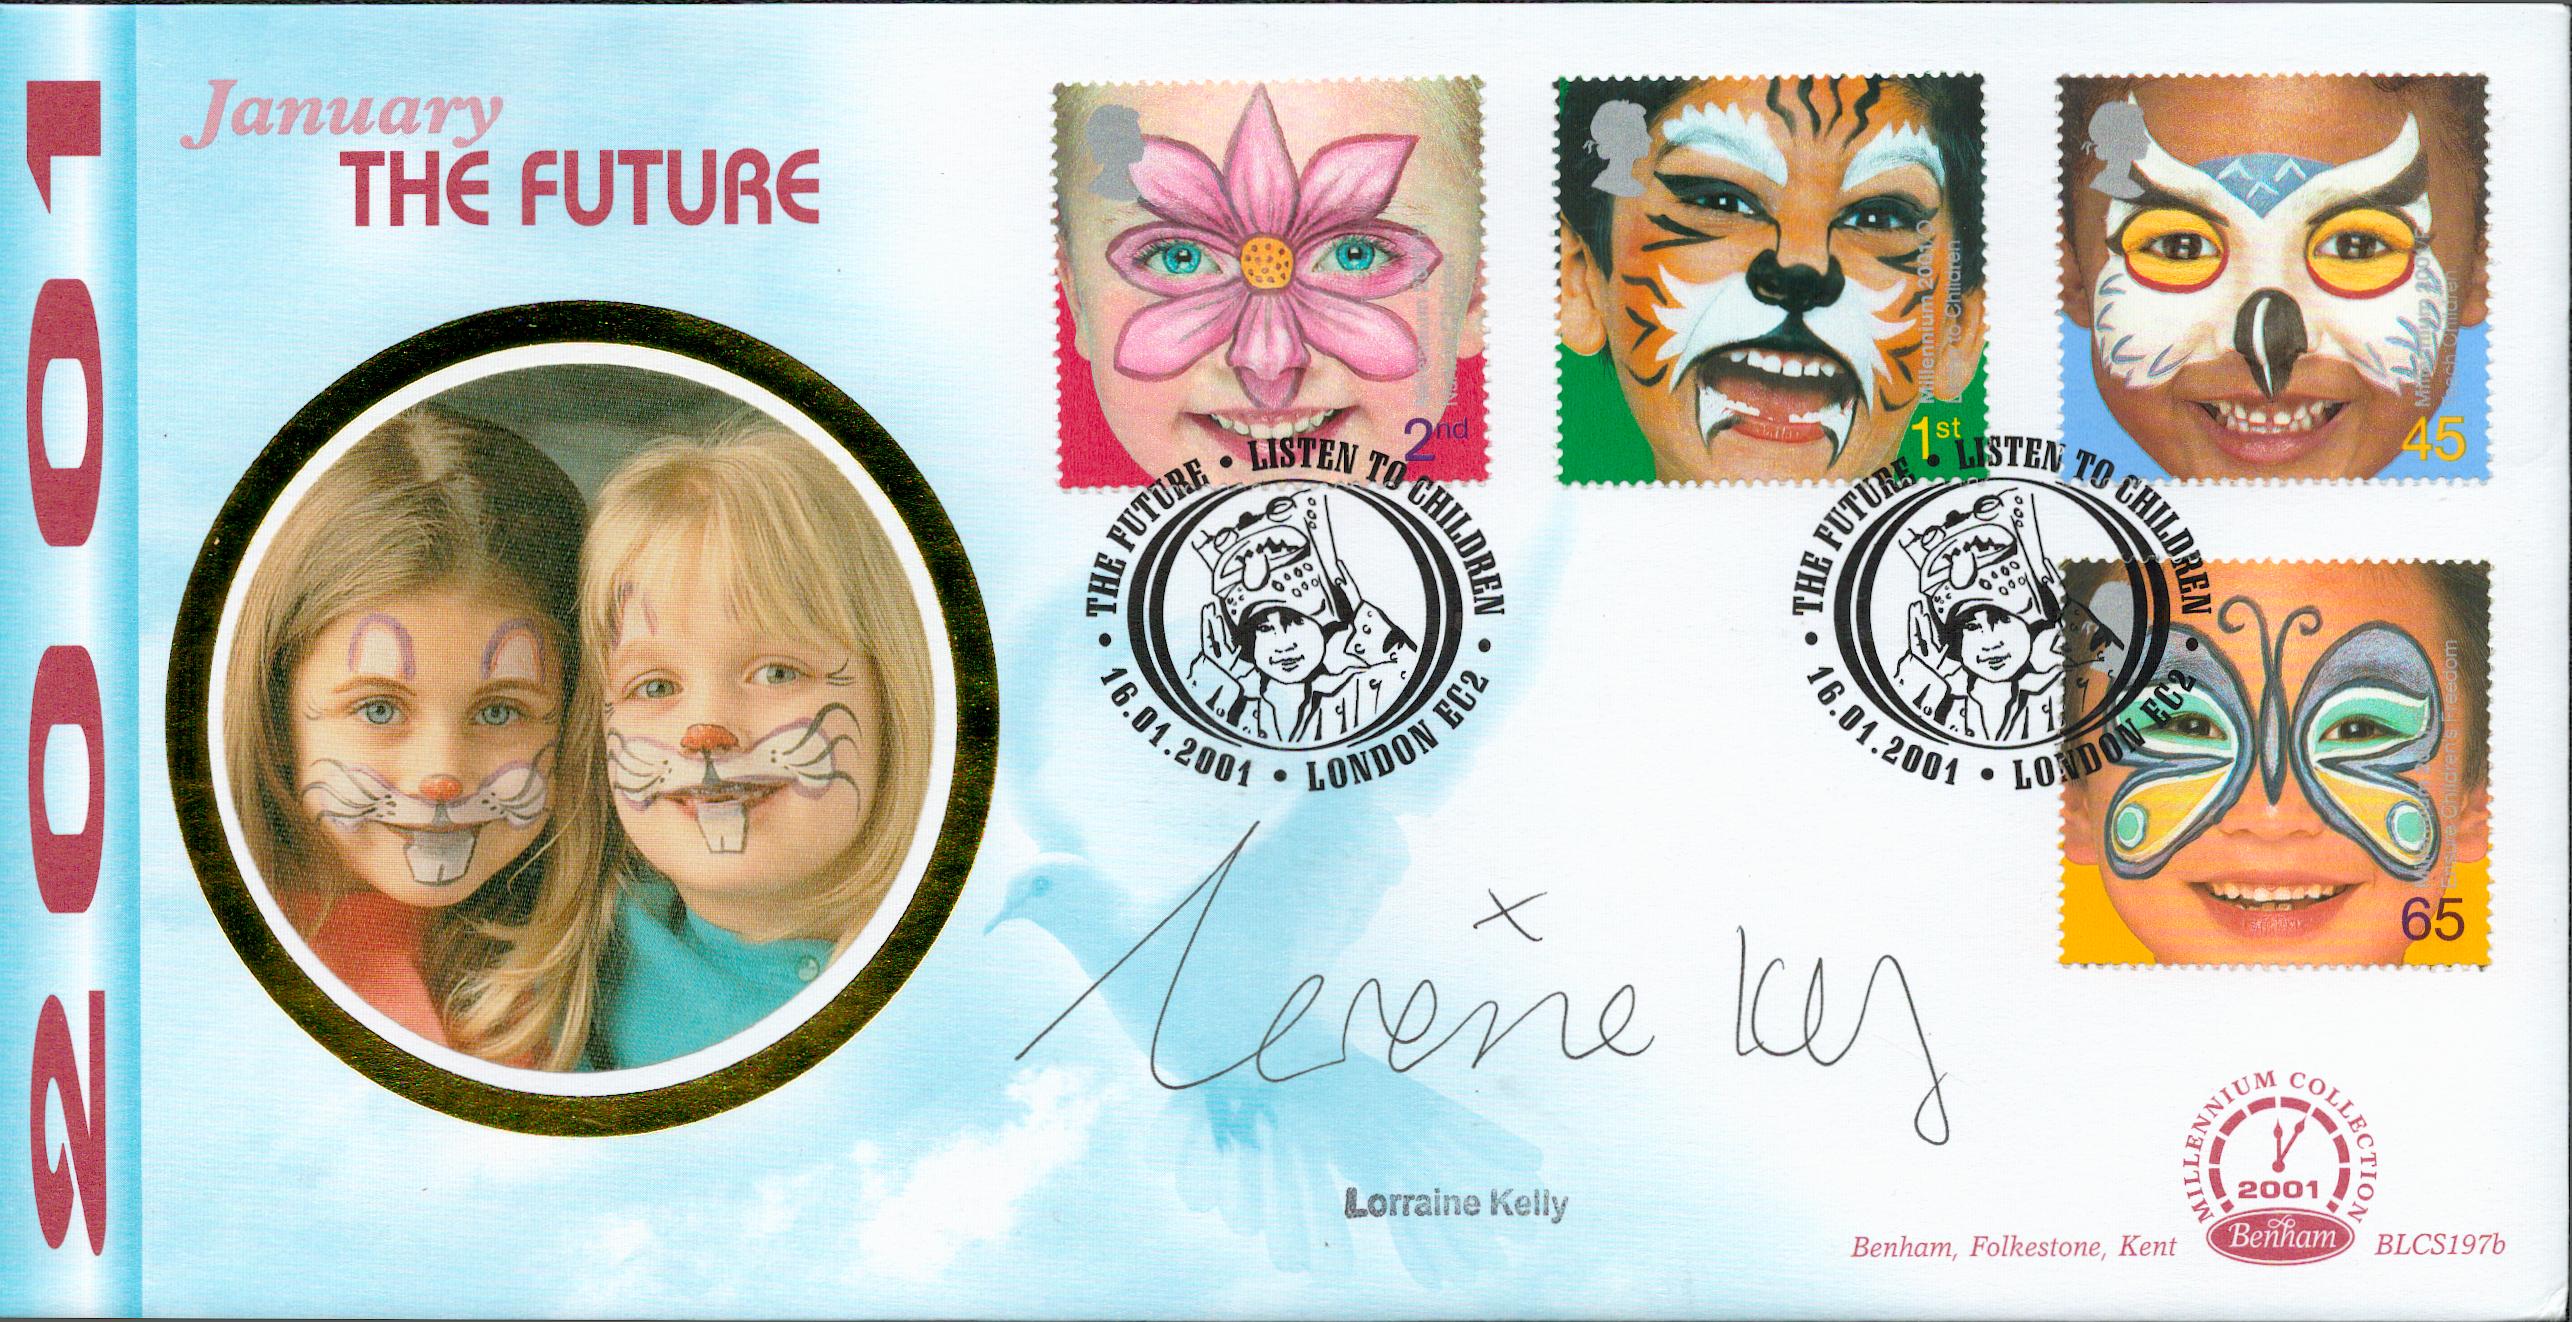 Lorraine Kelly signed January The Future 2001 FDC. 16th January 2001 London. Good Condition. All